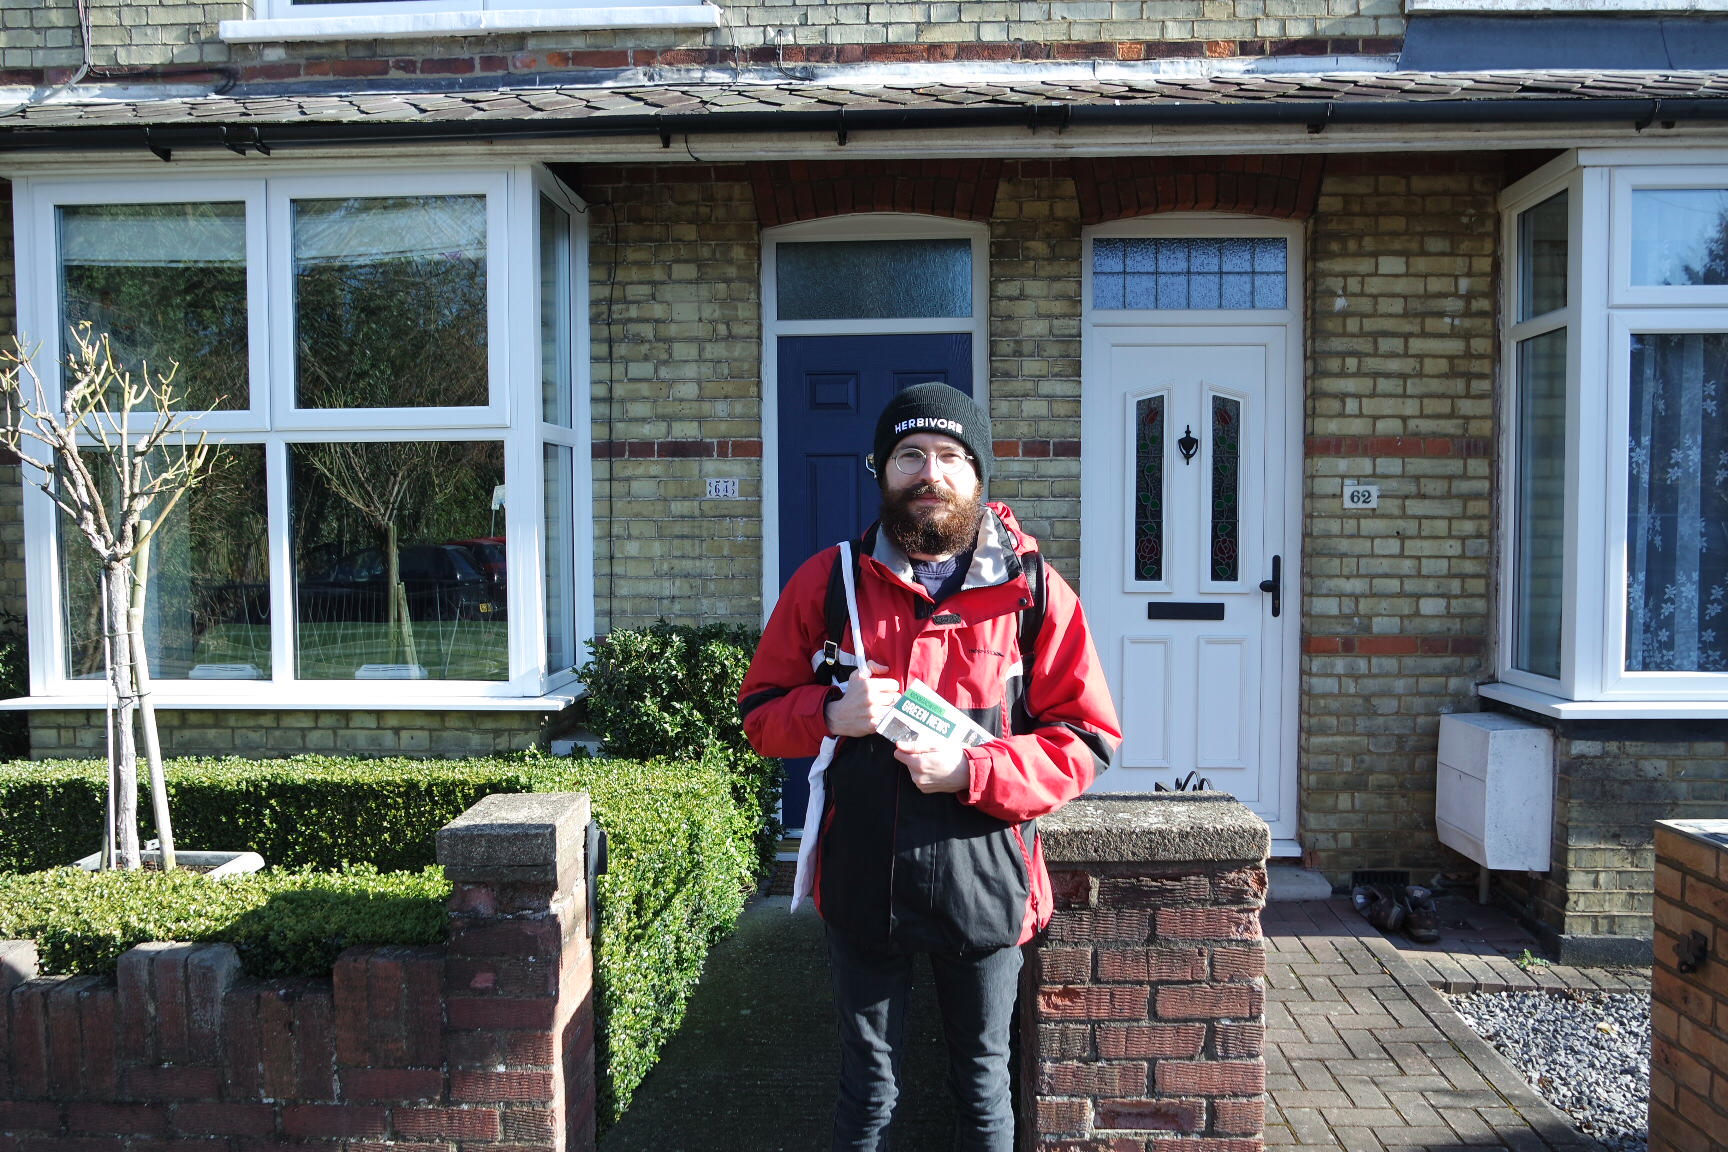 Tom pashby stands outside terraced houses holding leaflets and wearing a hat and coat. The sun is shining from the right of the frame, creating highlight and shadow.